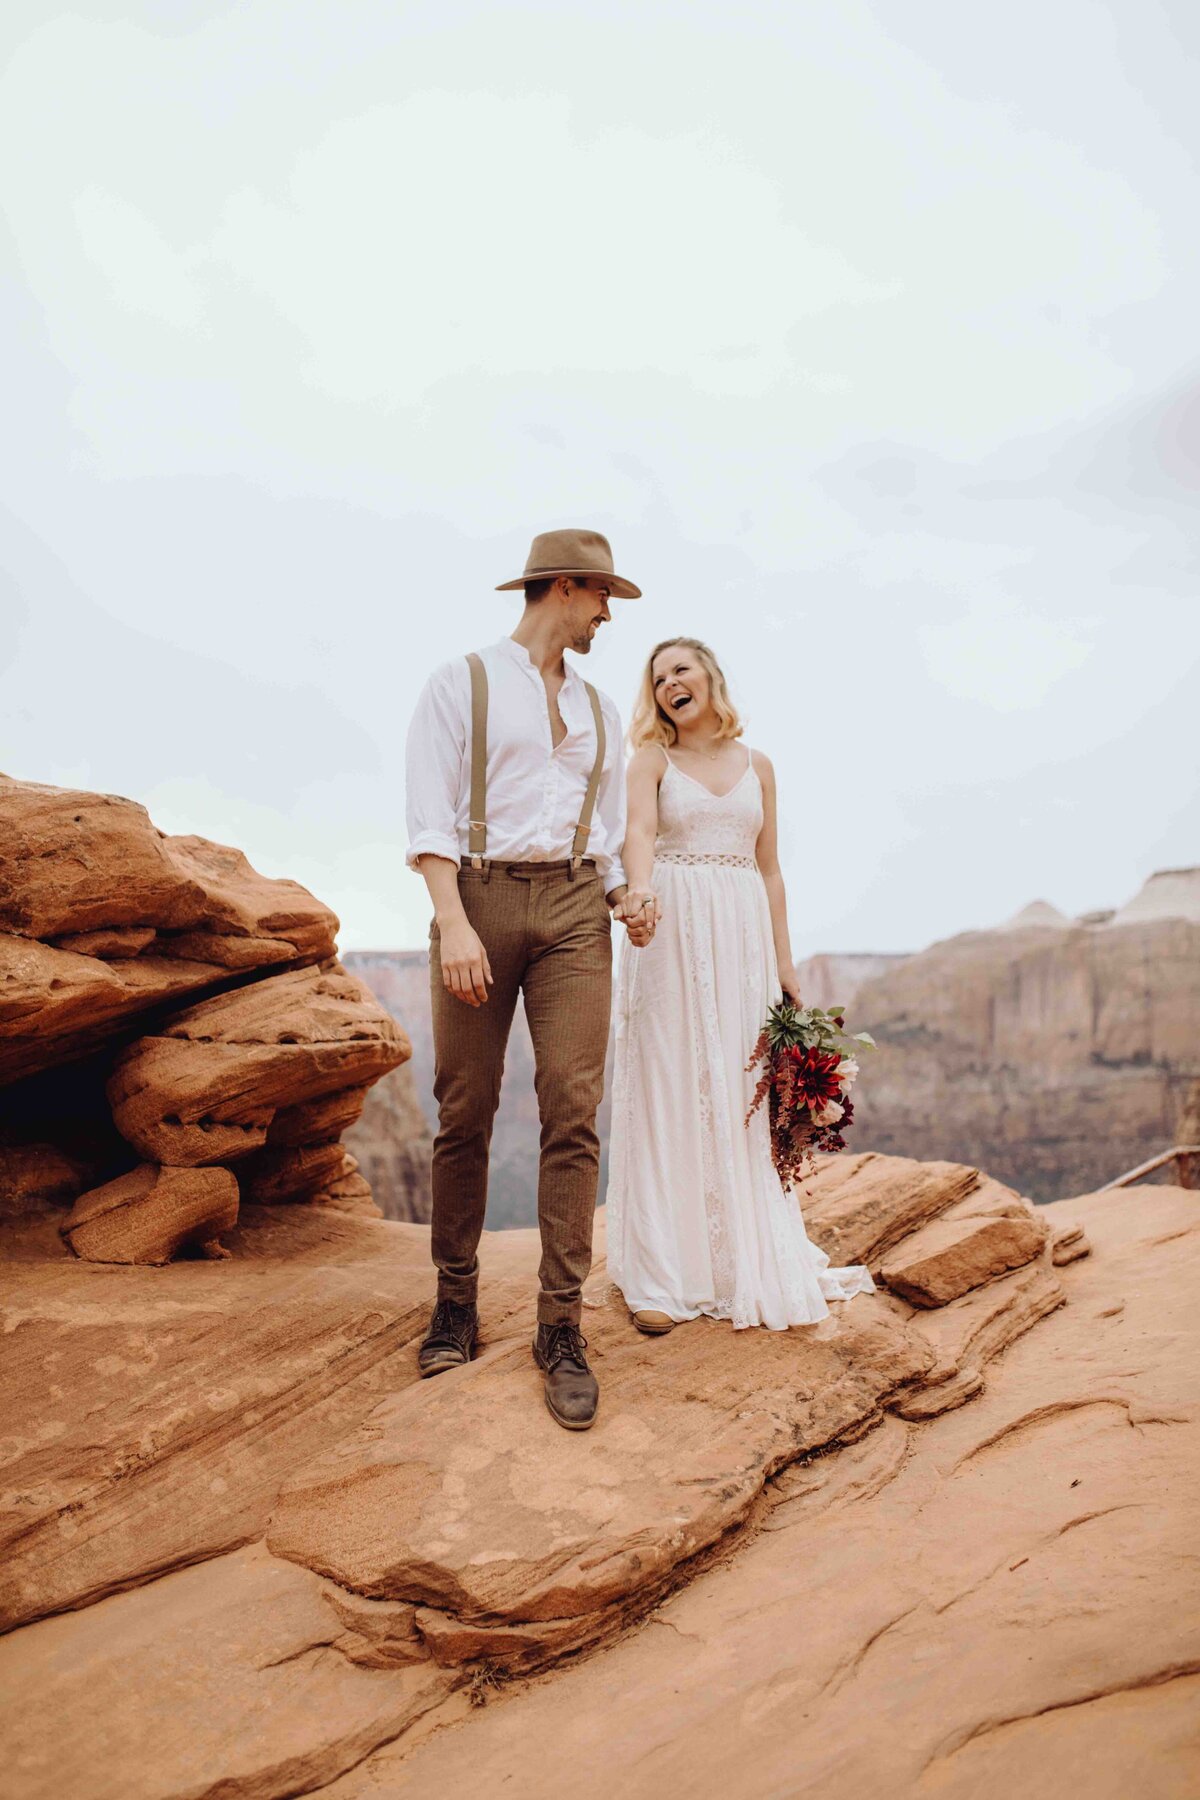 Elopement in Zion National Park. Bride and Groom walking hand in hand, laughing and smiling at each other.